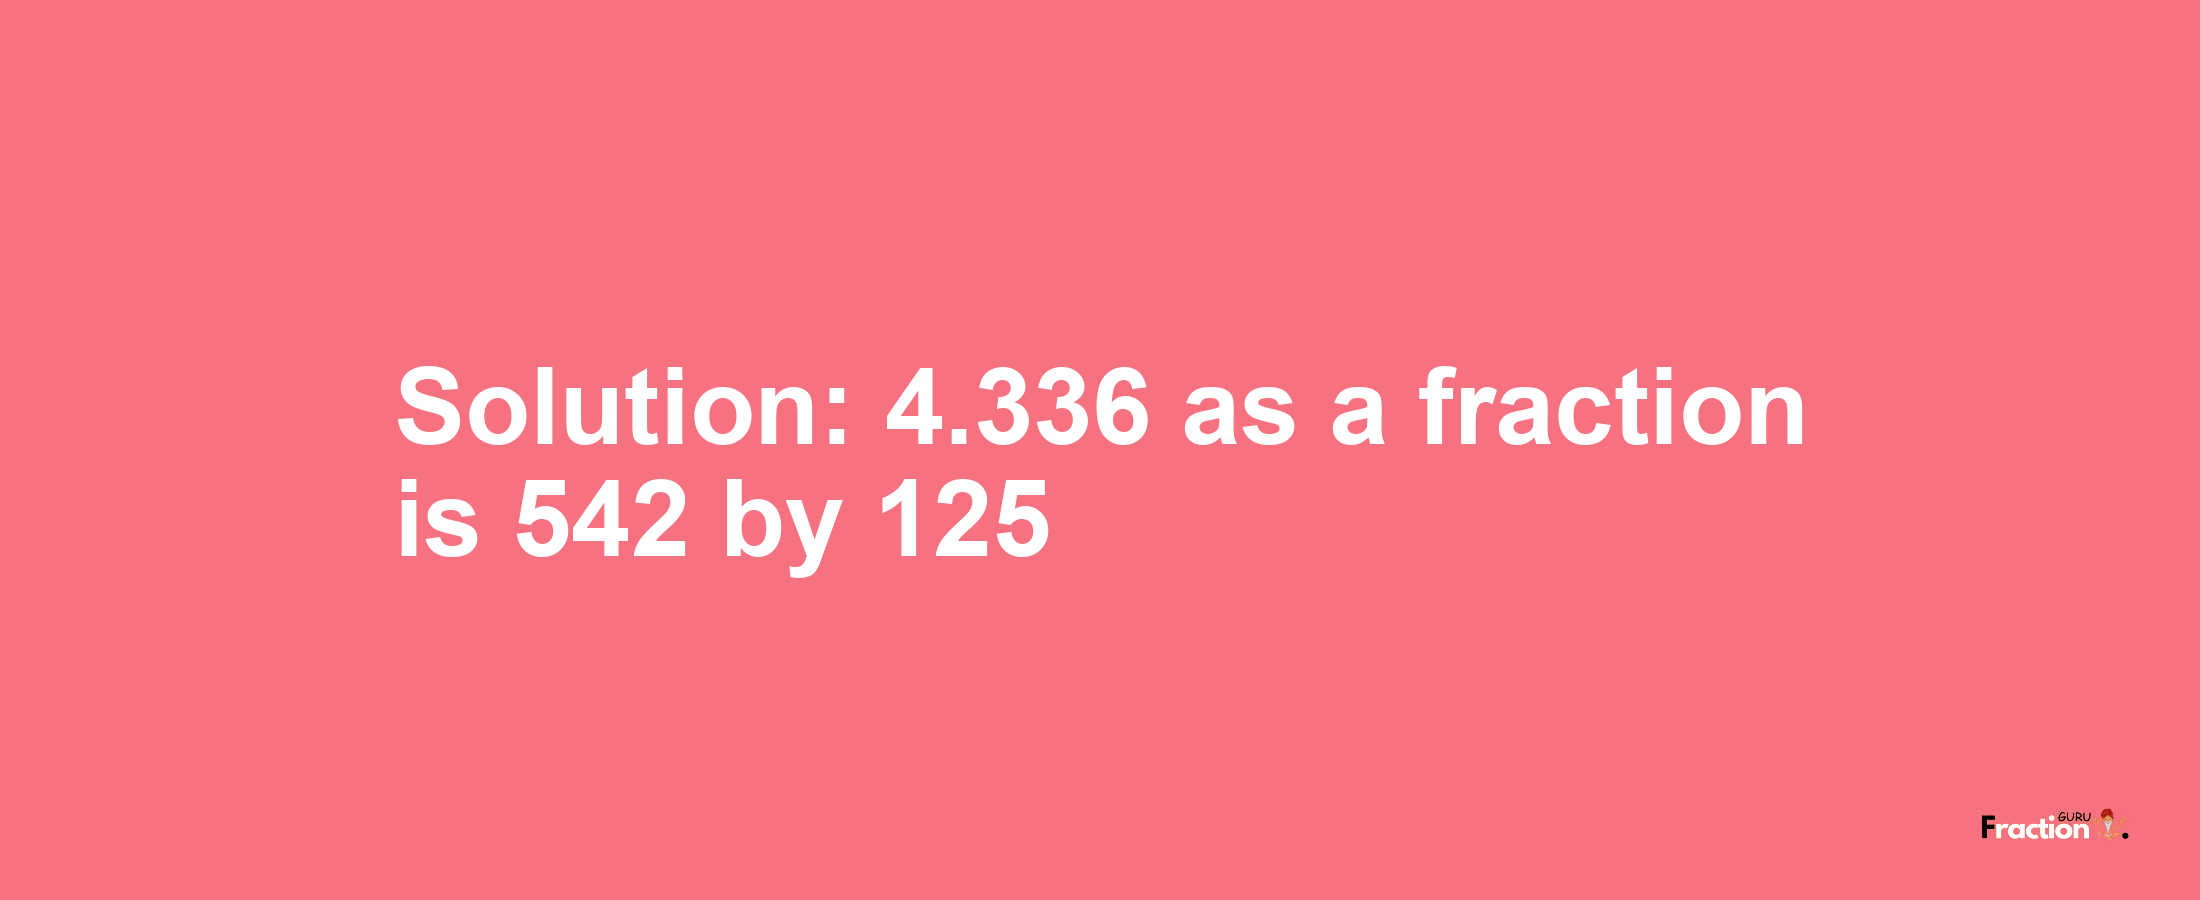 Solution:4.336 as a fraction is 542/125